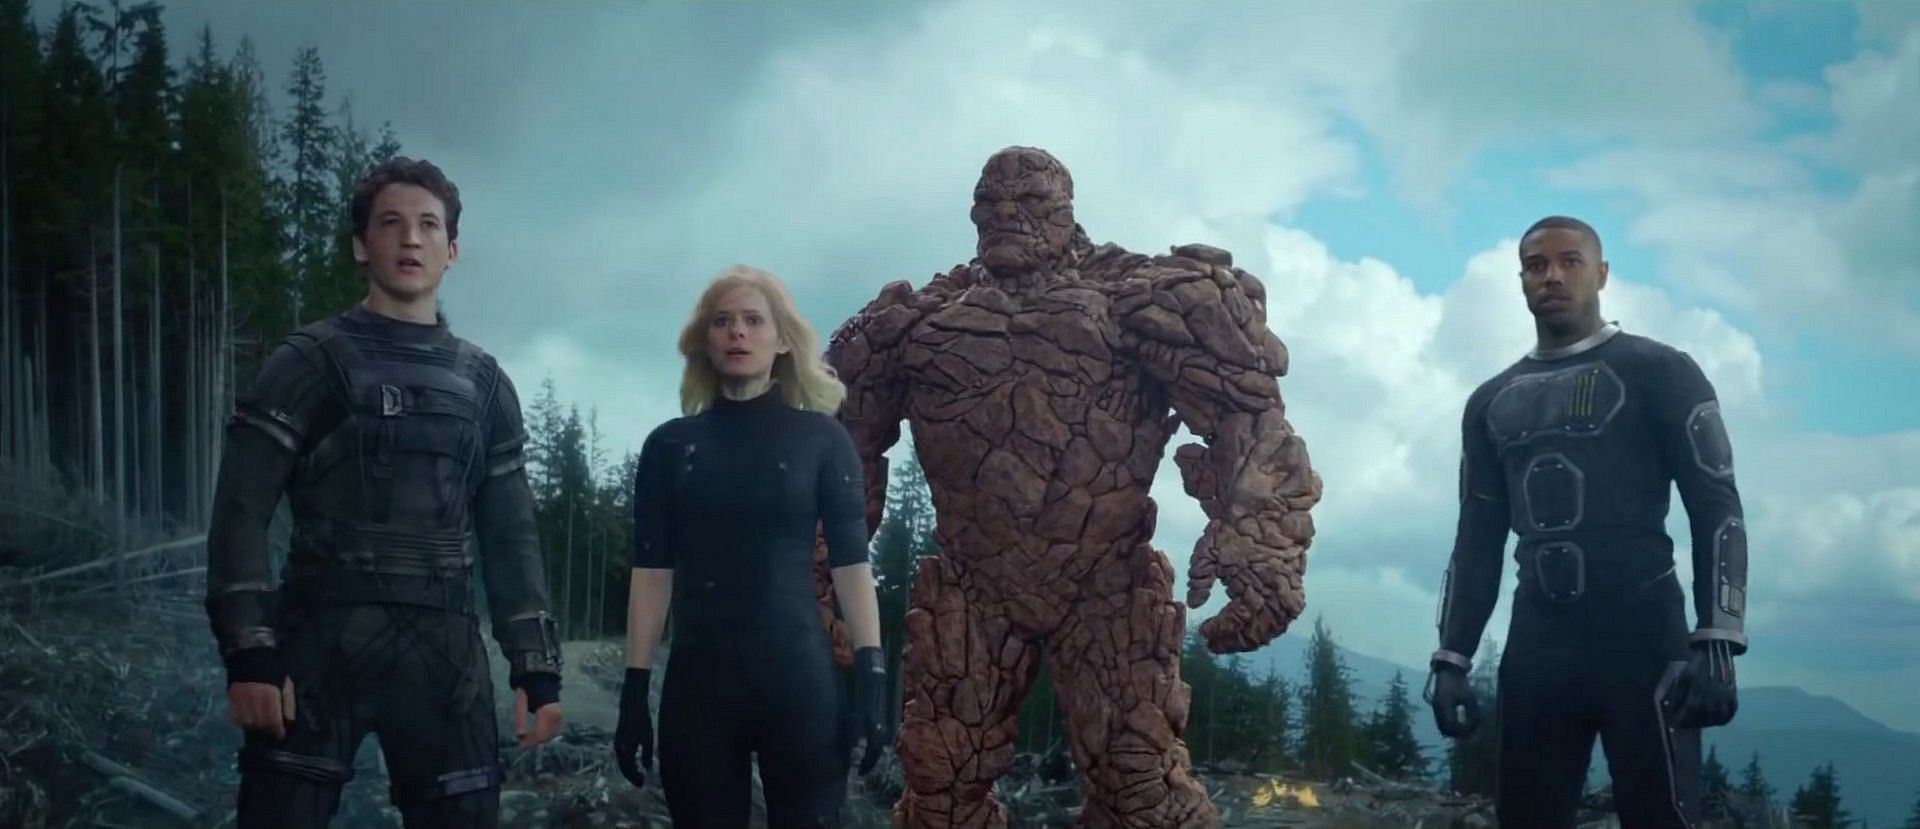 Despite its flaws, the cast and visual effects in Fantastic Four are impressive (Image via 20th Century Fox)